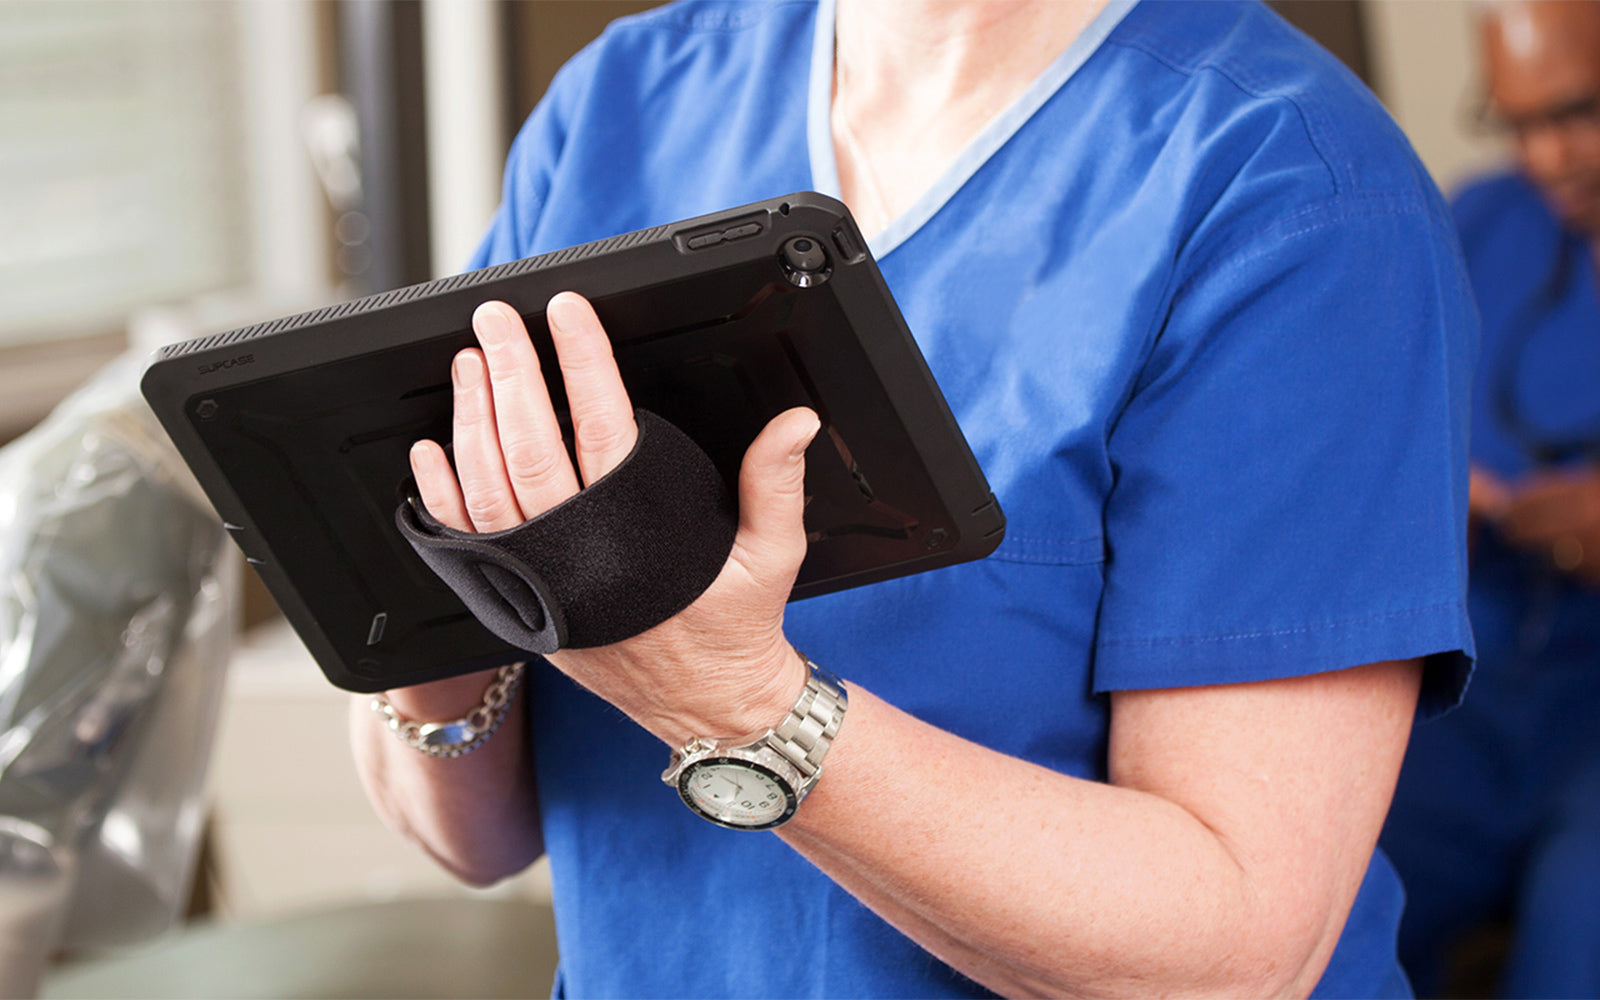 Handeholder Products | Ergonomic Tablet Holsters